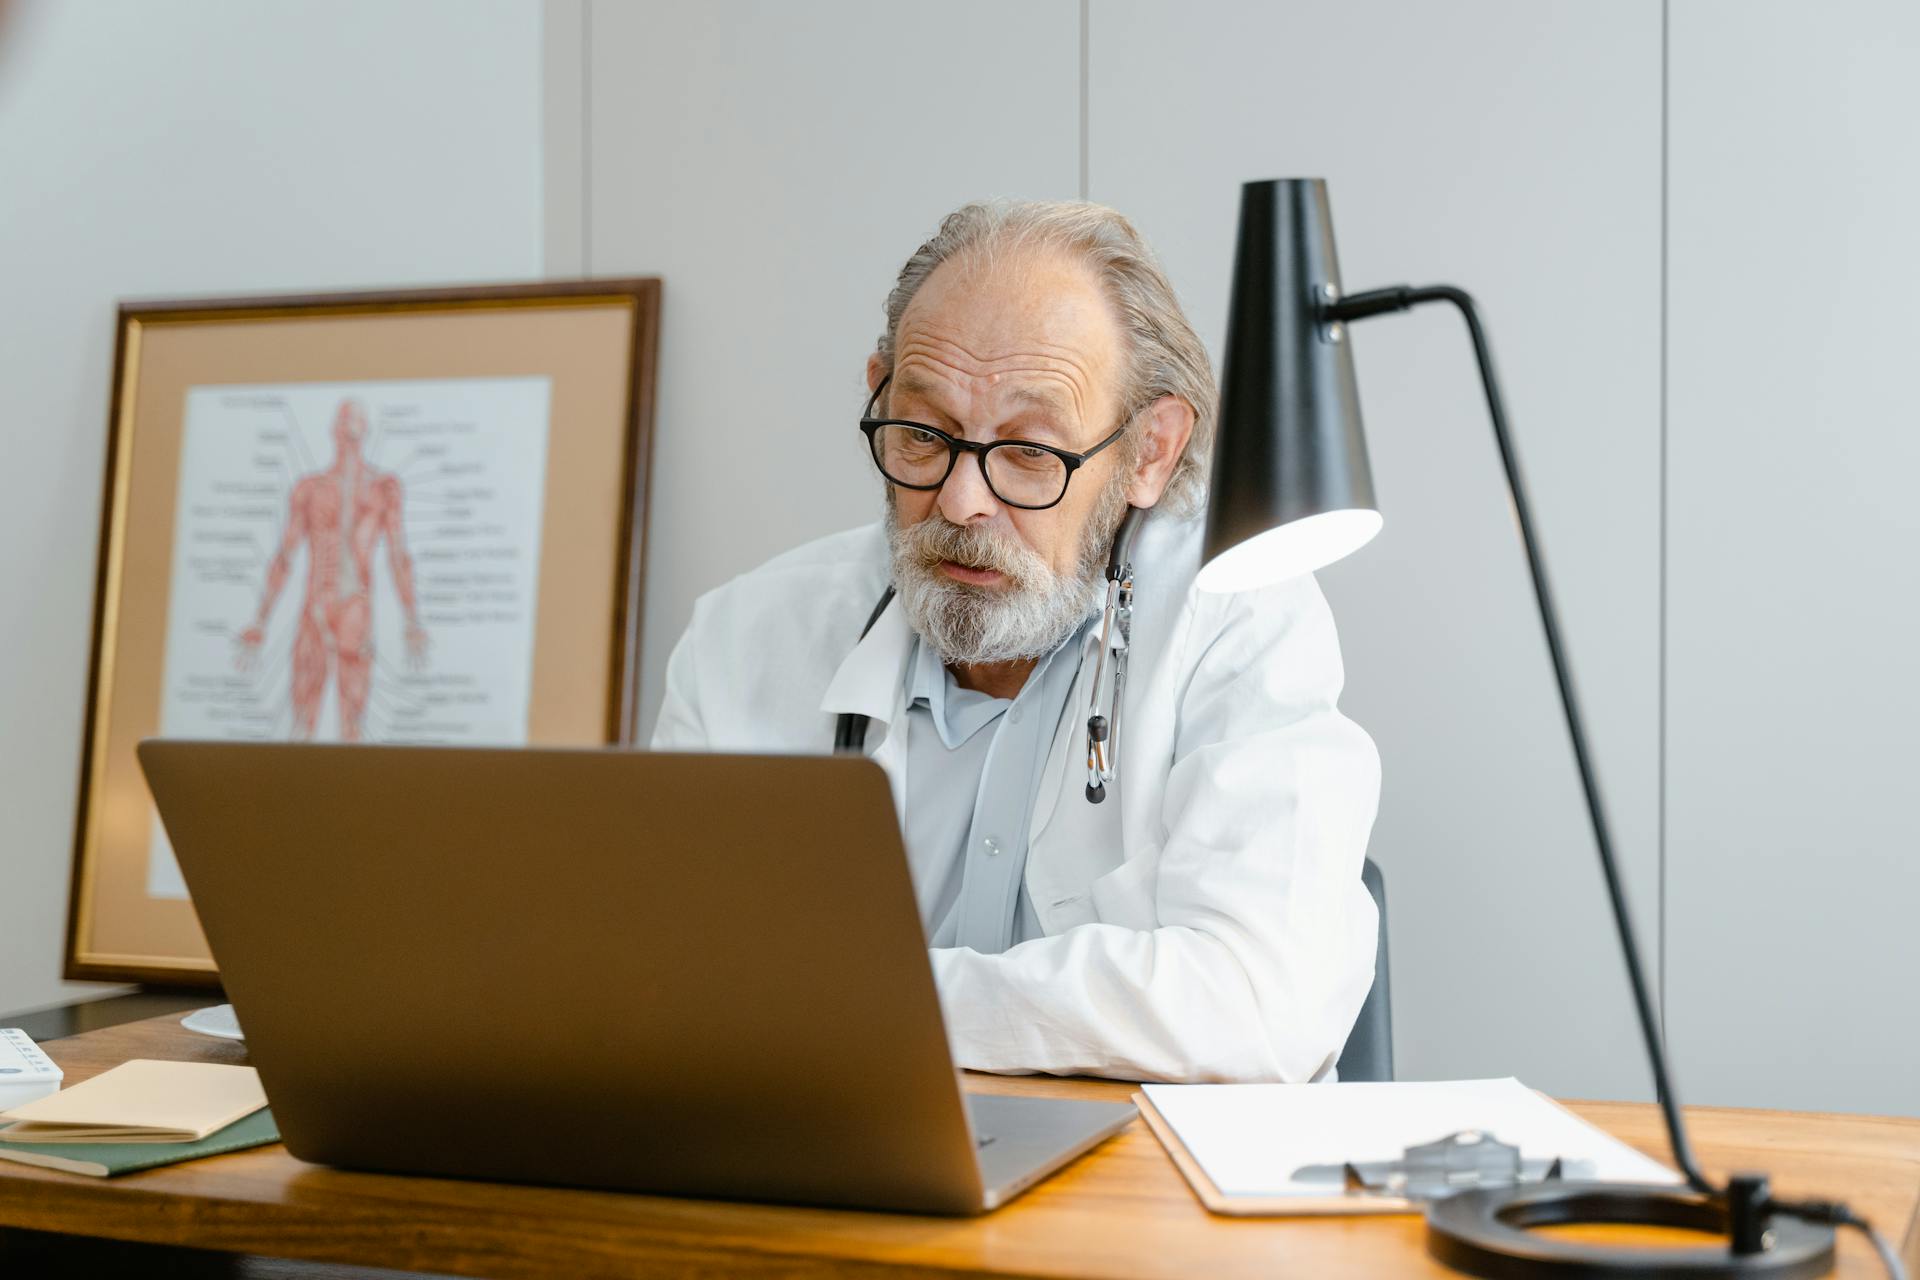 An old doctor | Source: Pexels